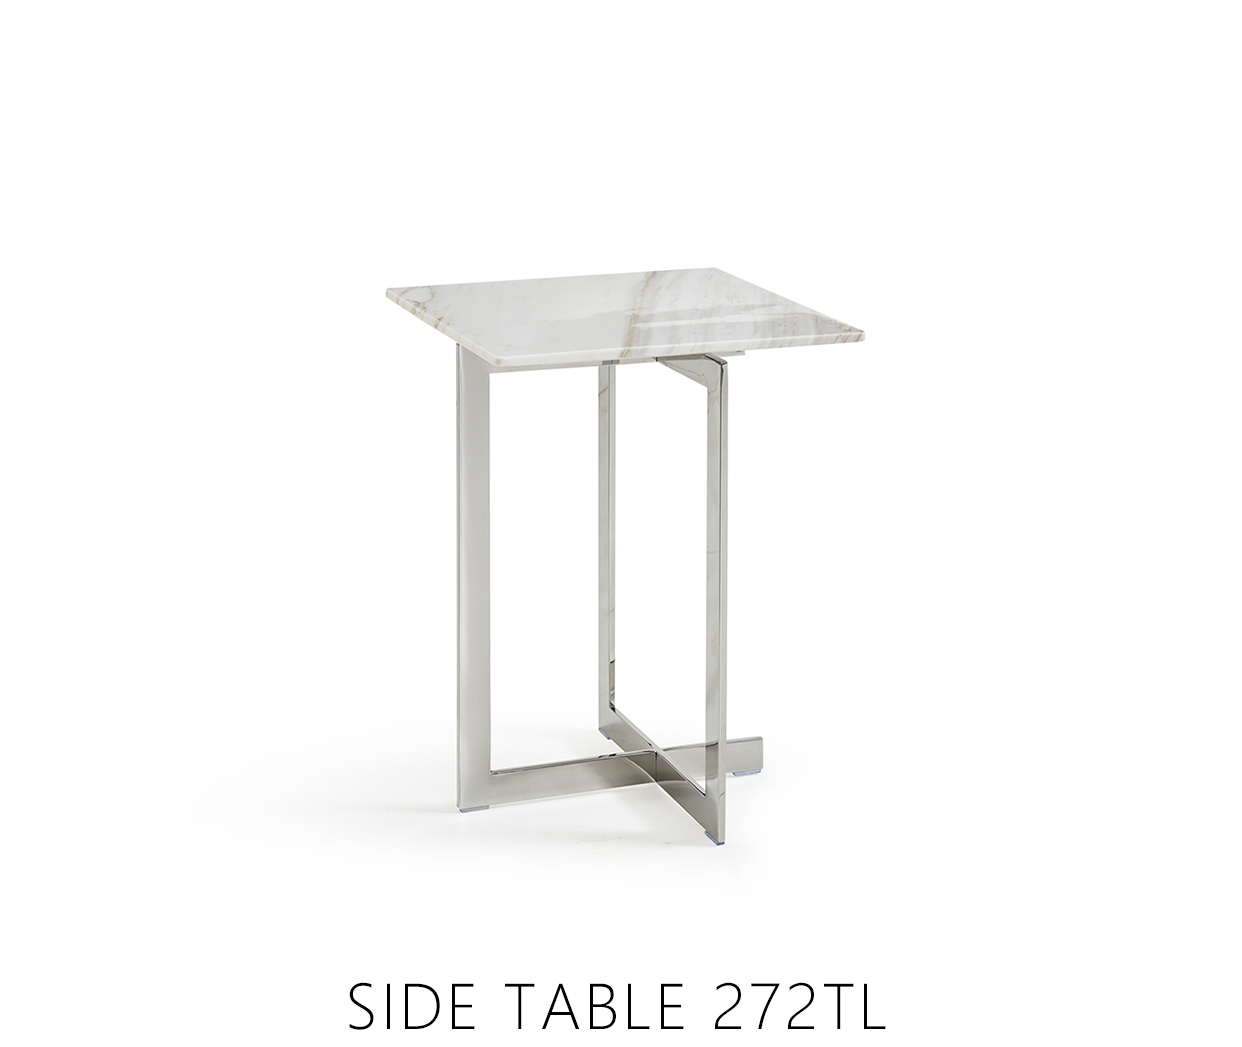 SIDE TABLE 272TL